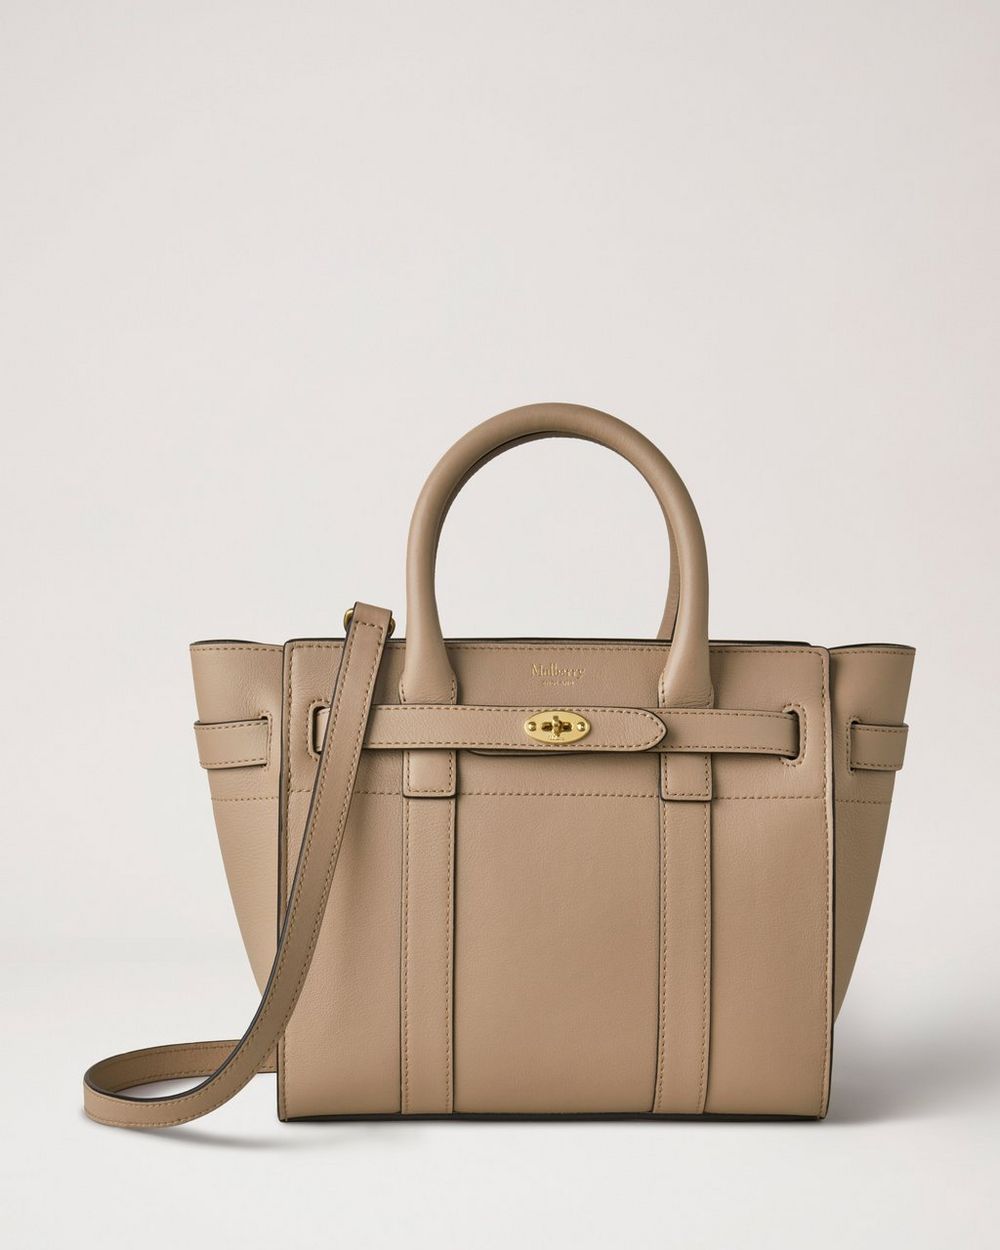 Women's Zipped Bayswater Small Bag by Mulberry